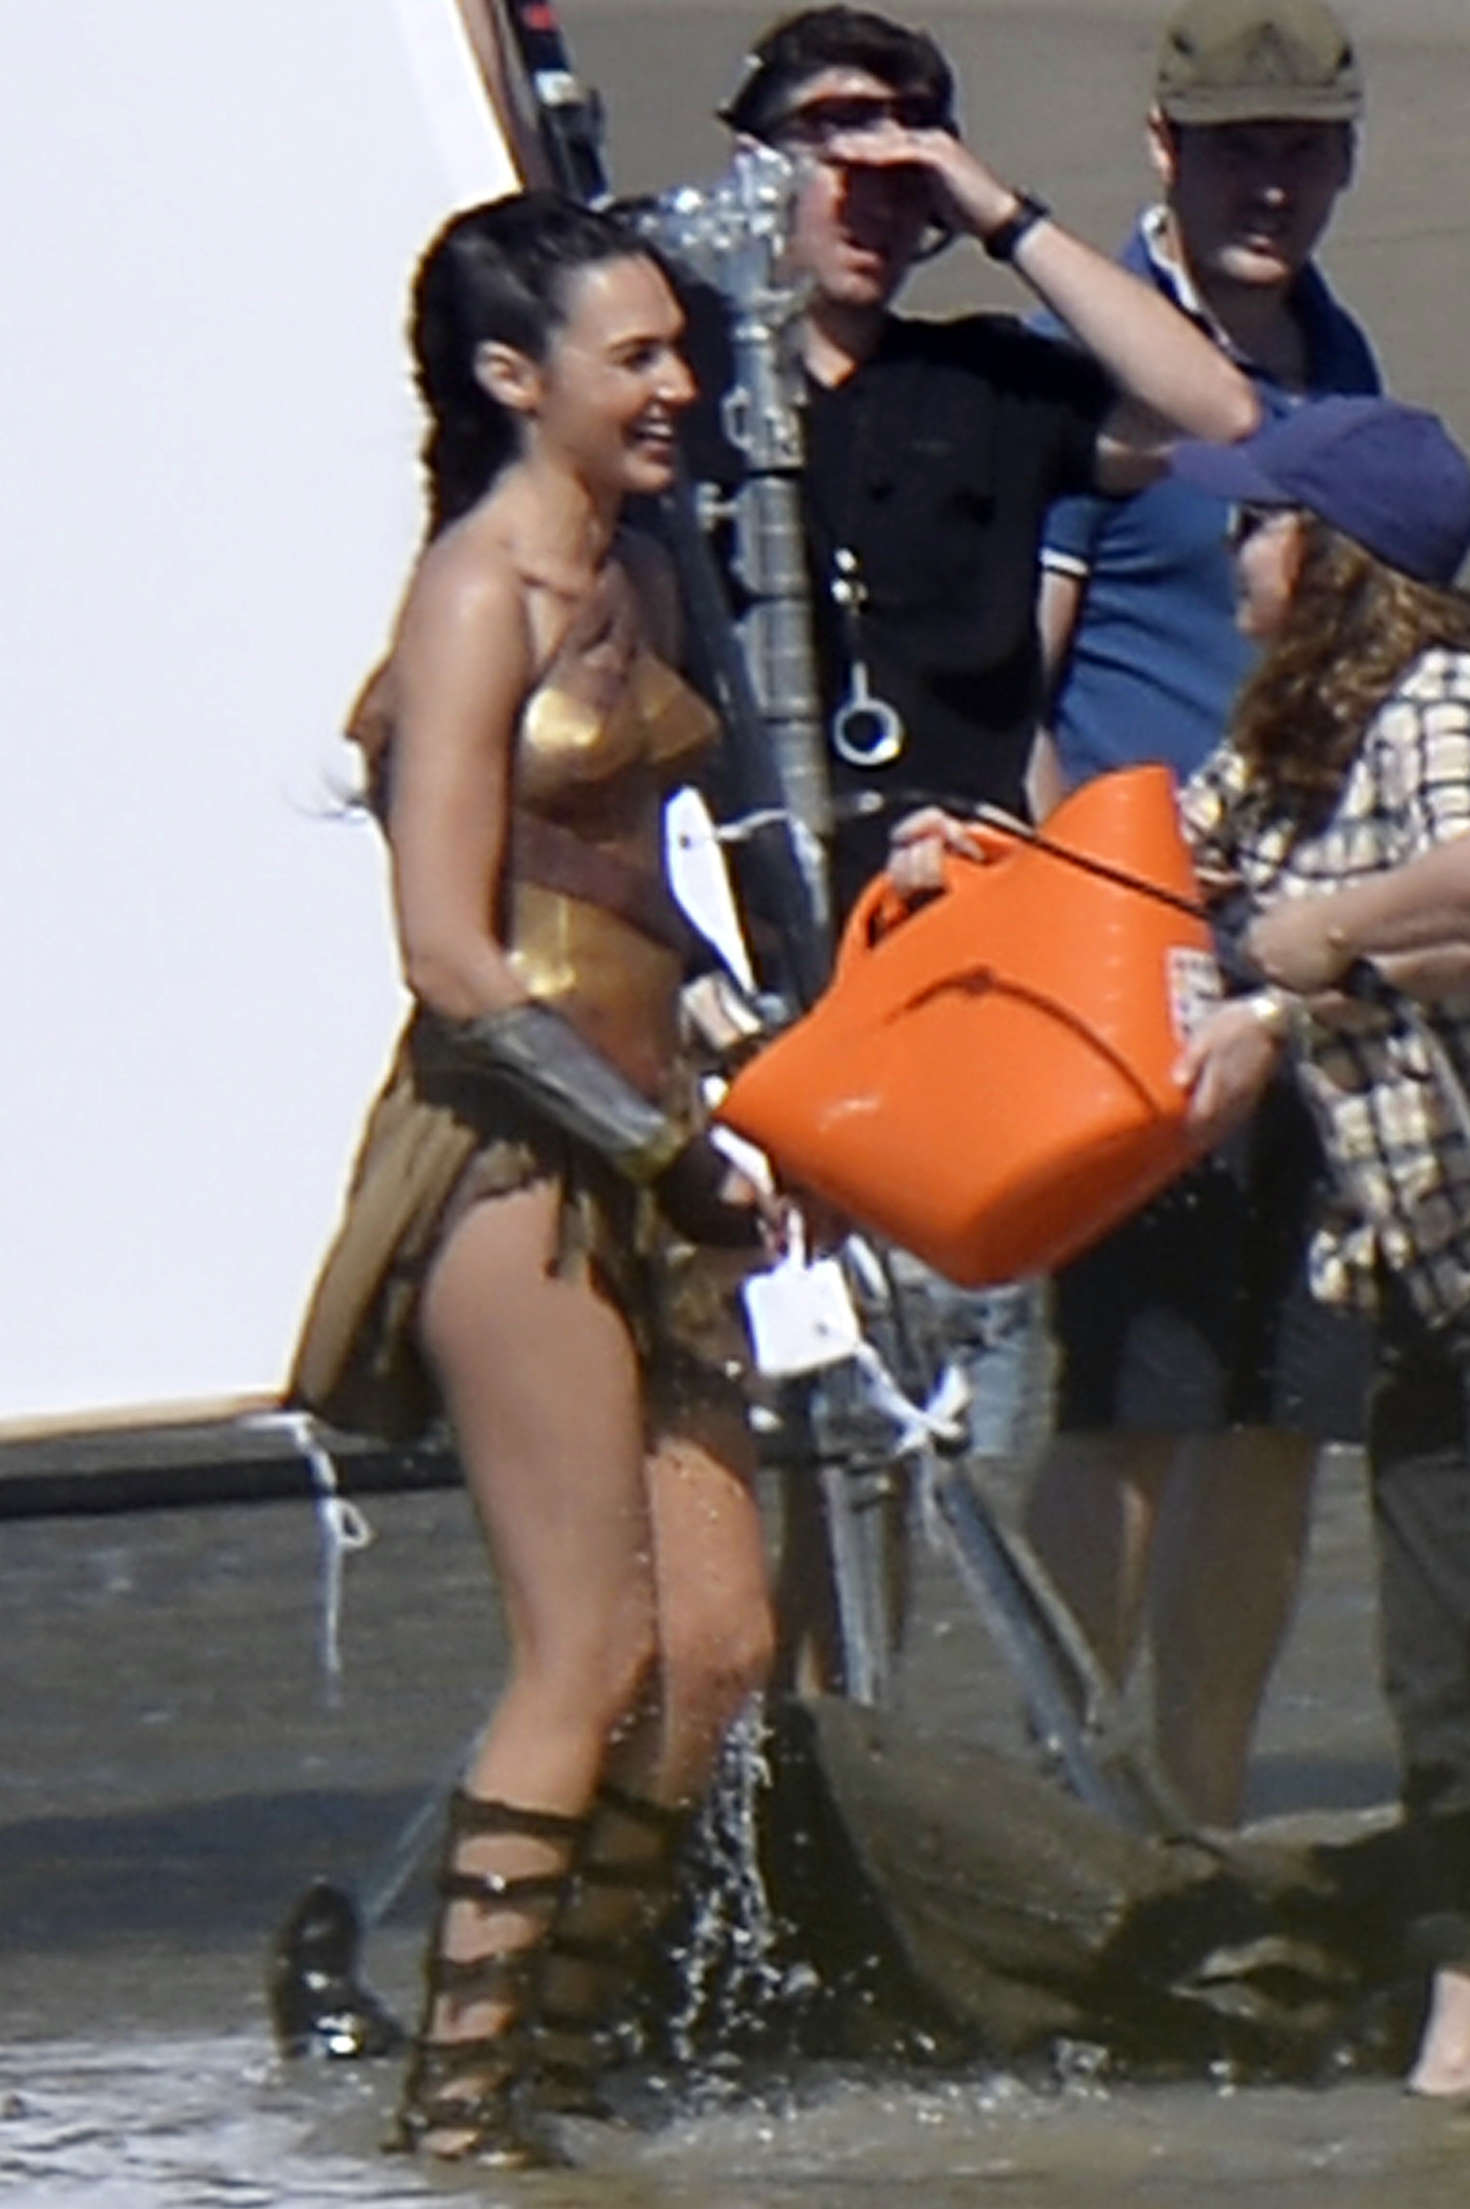 Gal Gadot On The Set Of Wonder Woman On The Beach In Italy Gotceleb The latest tweets from gal gadot (@galgadot): gal gadot on the set of wonder woman